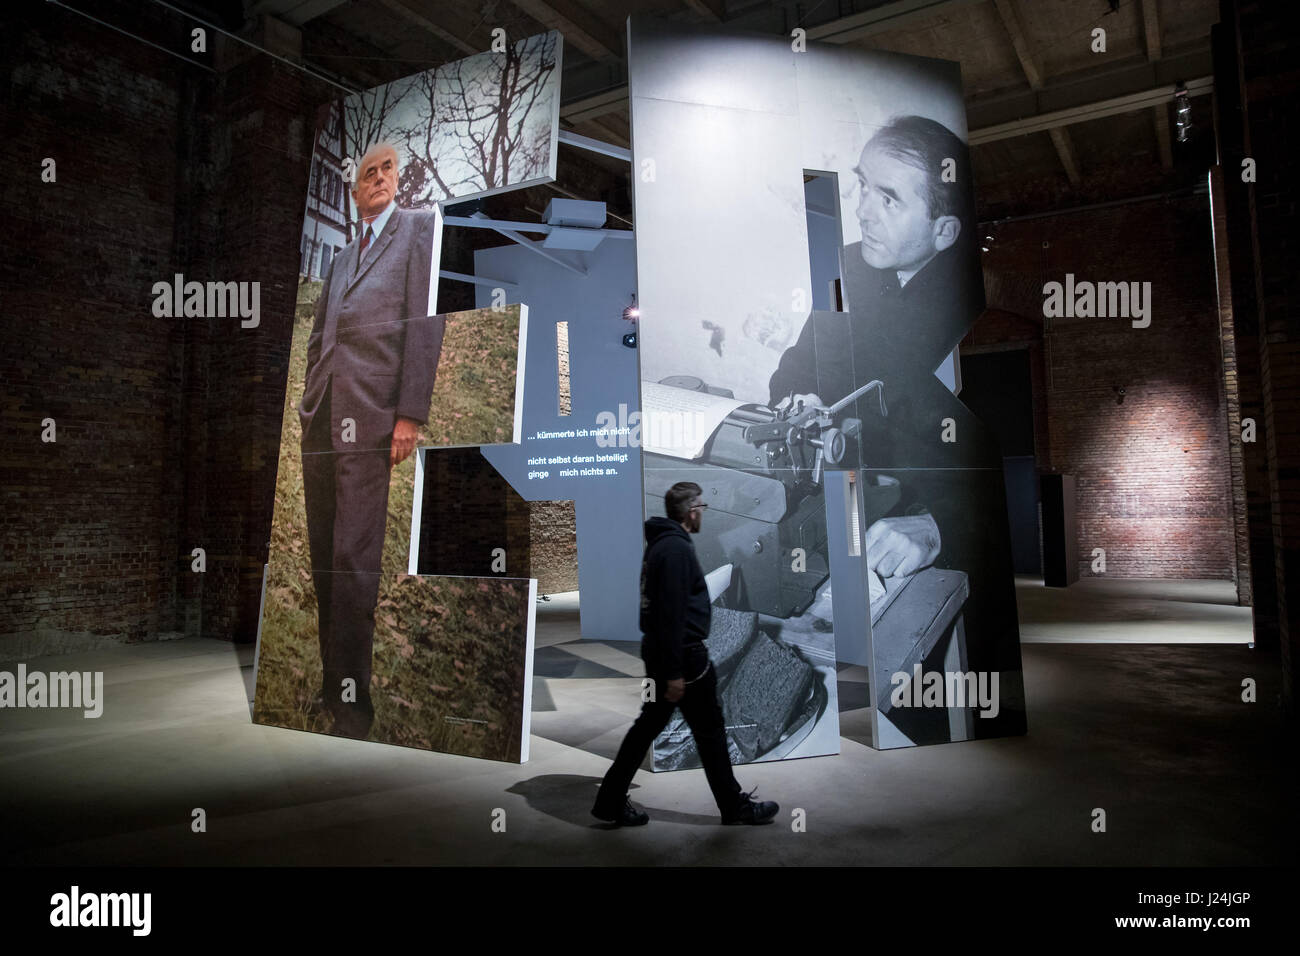 The two giant letters 'E' and 'R' with projections of photos of architect and minister of armaments and war production Albert Speer can be seen at the exhibition 'Albert Speer in der Bundesrepublik. Vom Umgang mit deutscher Vergangenheit' (lit. 'Albert Speer in the Federal Republic. On handling German past' at the Dokumentationszentrum Reichsparteigelaende (lit. 'Documentation Center Reichs Party Grounds') in Nuremberg, Germany, 25 April 2017. Using historical documents, the exhibition wants to proof that Speer was not, as assumed, an apolitical technocrate who did not know about the crimes of Stock Photo